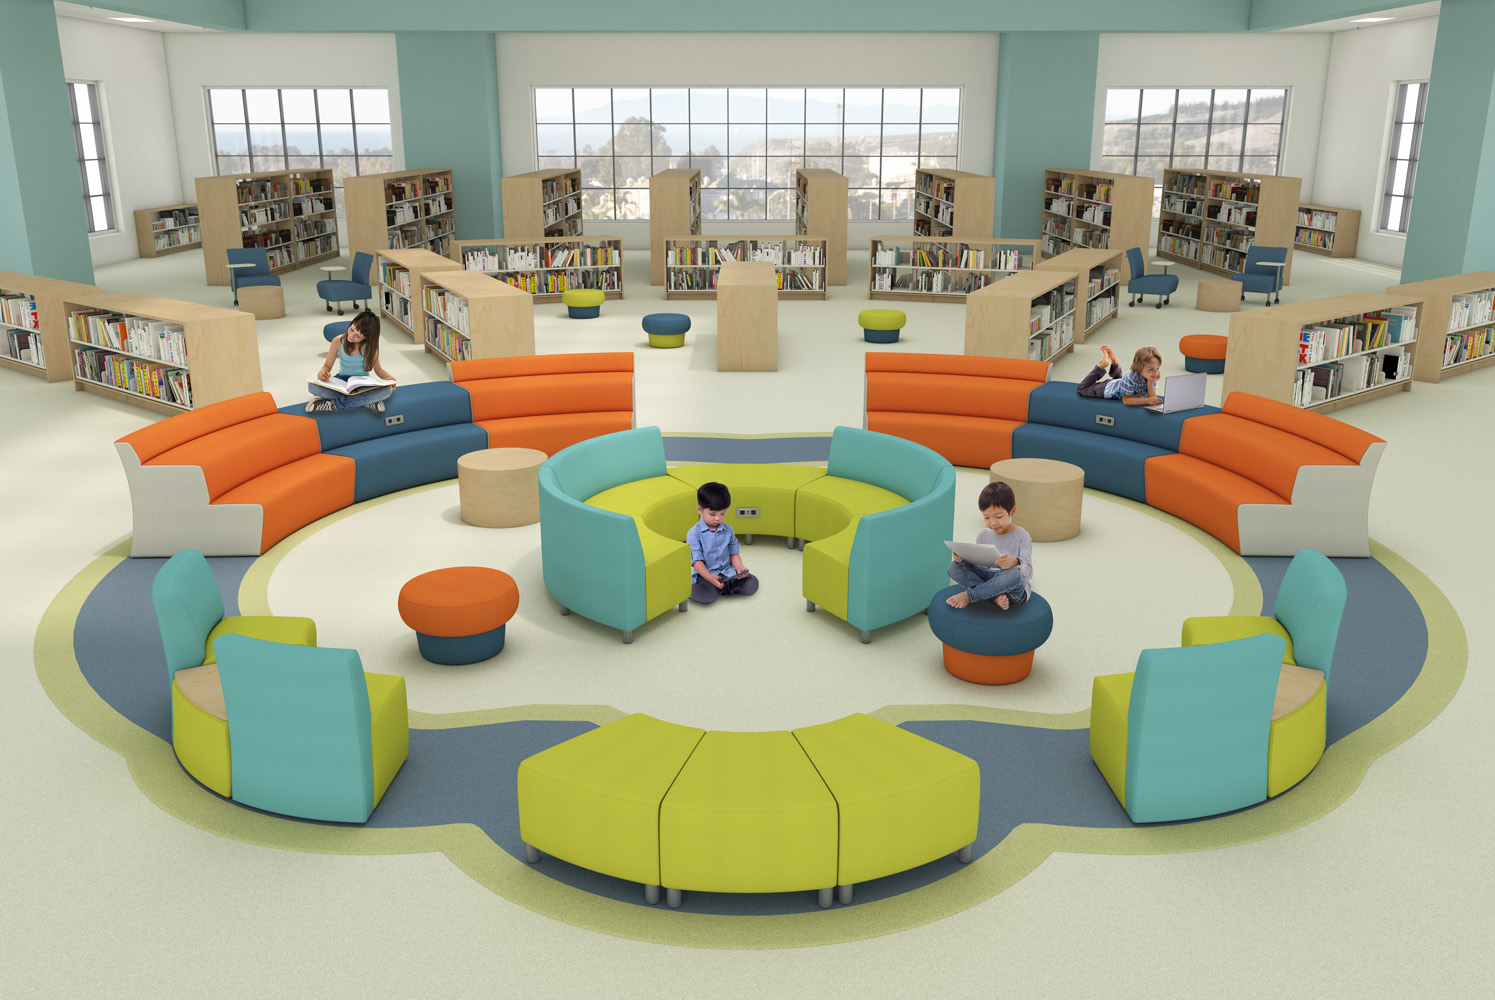 Brighton Library configuration with Raven and Muffet